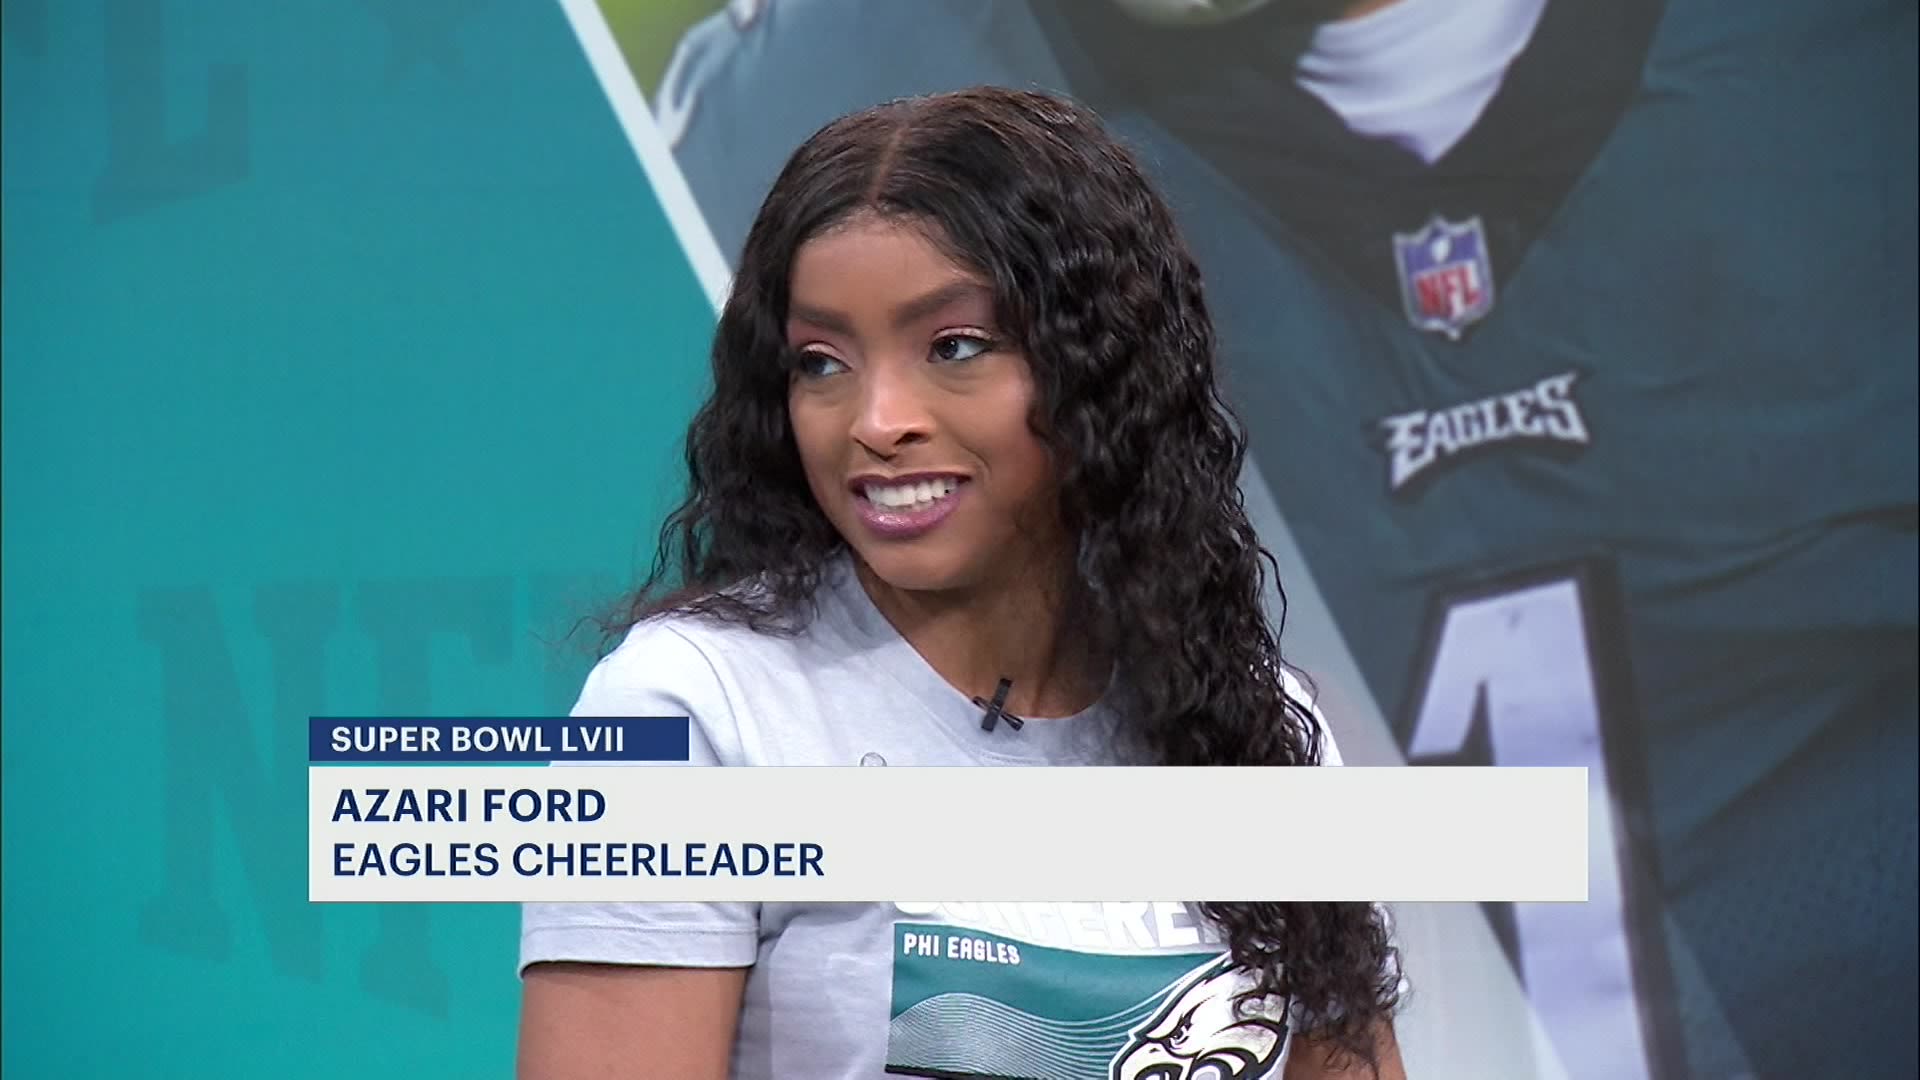 Philadelphia Eagles cheerleader from NJ to cheer in her first-ever